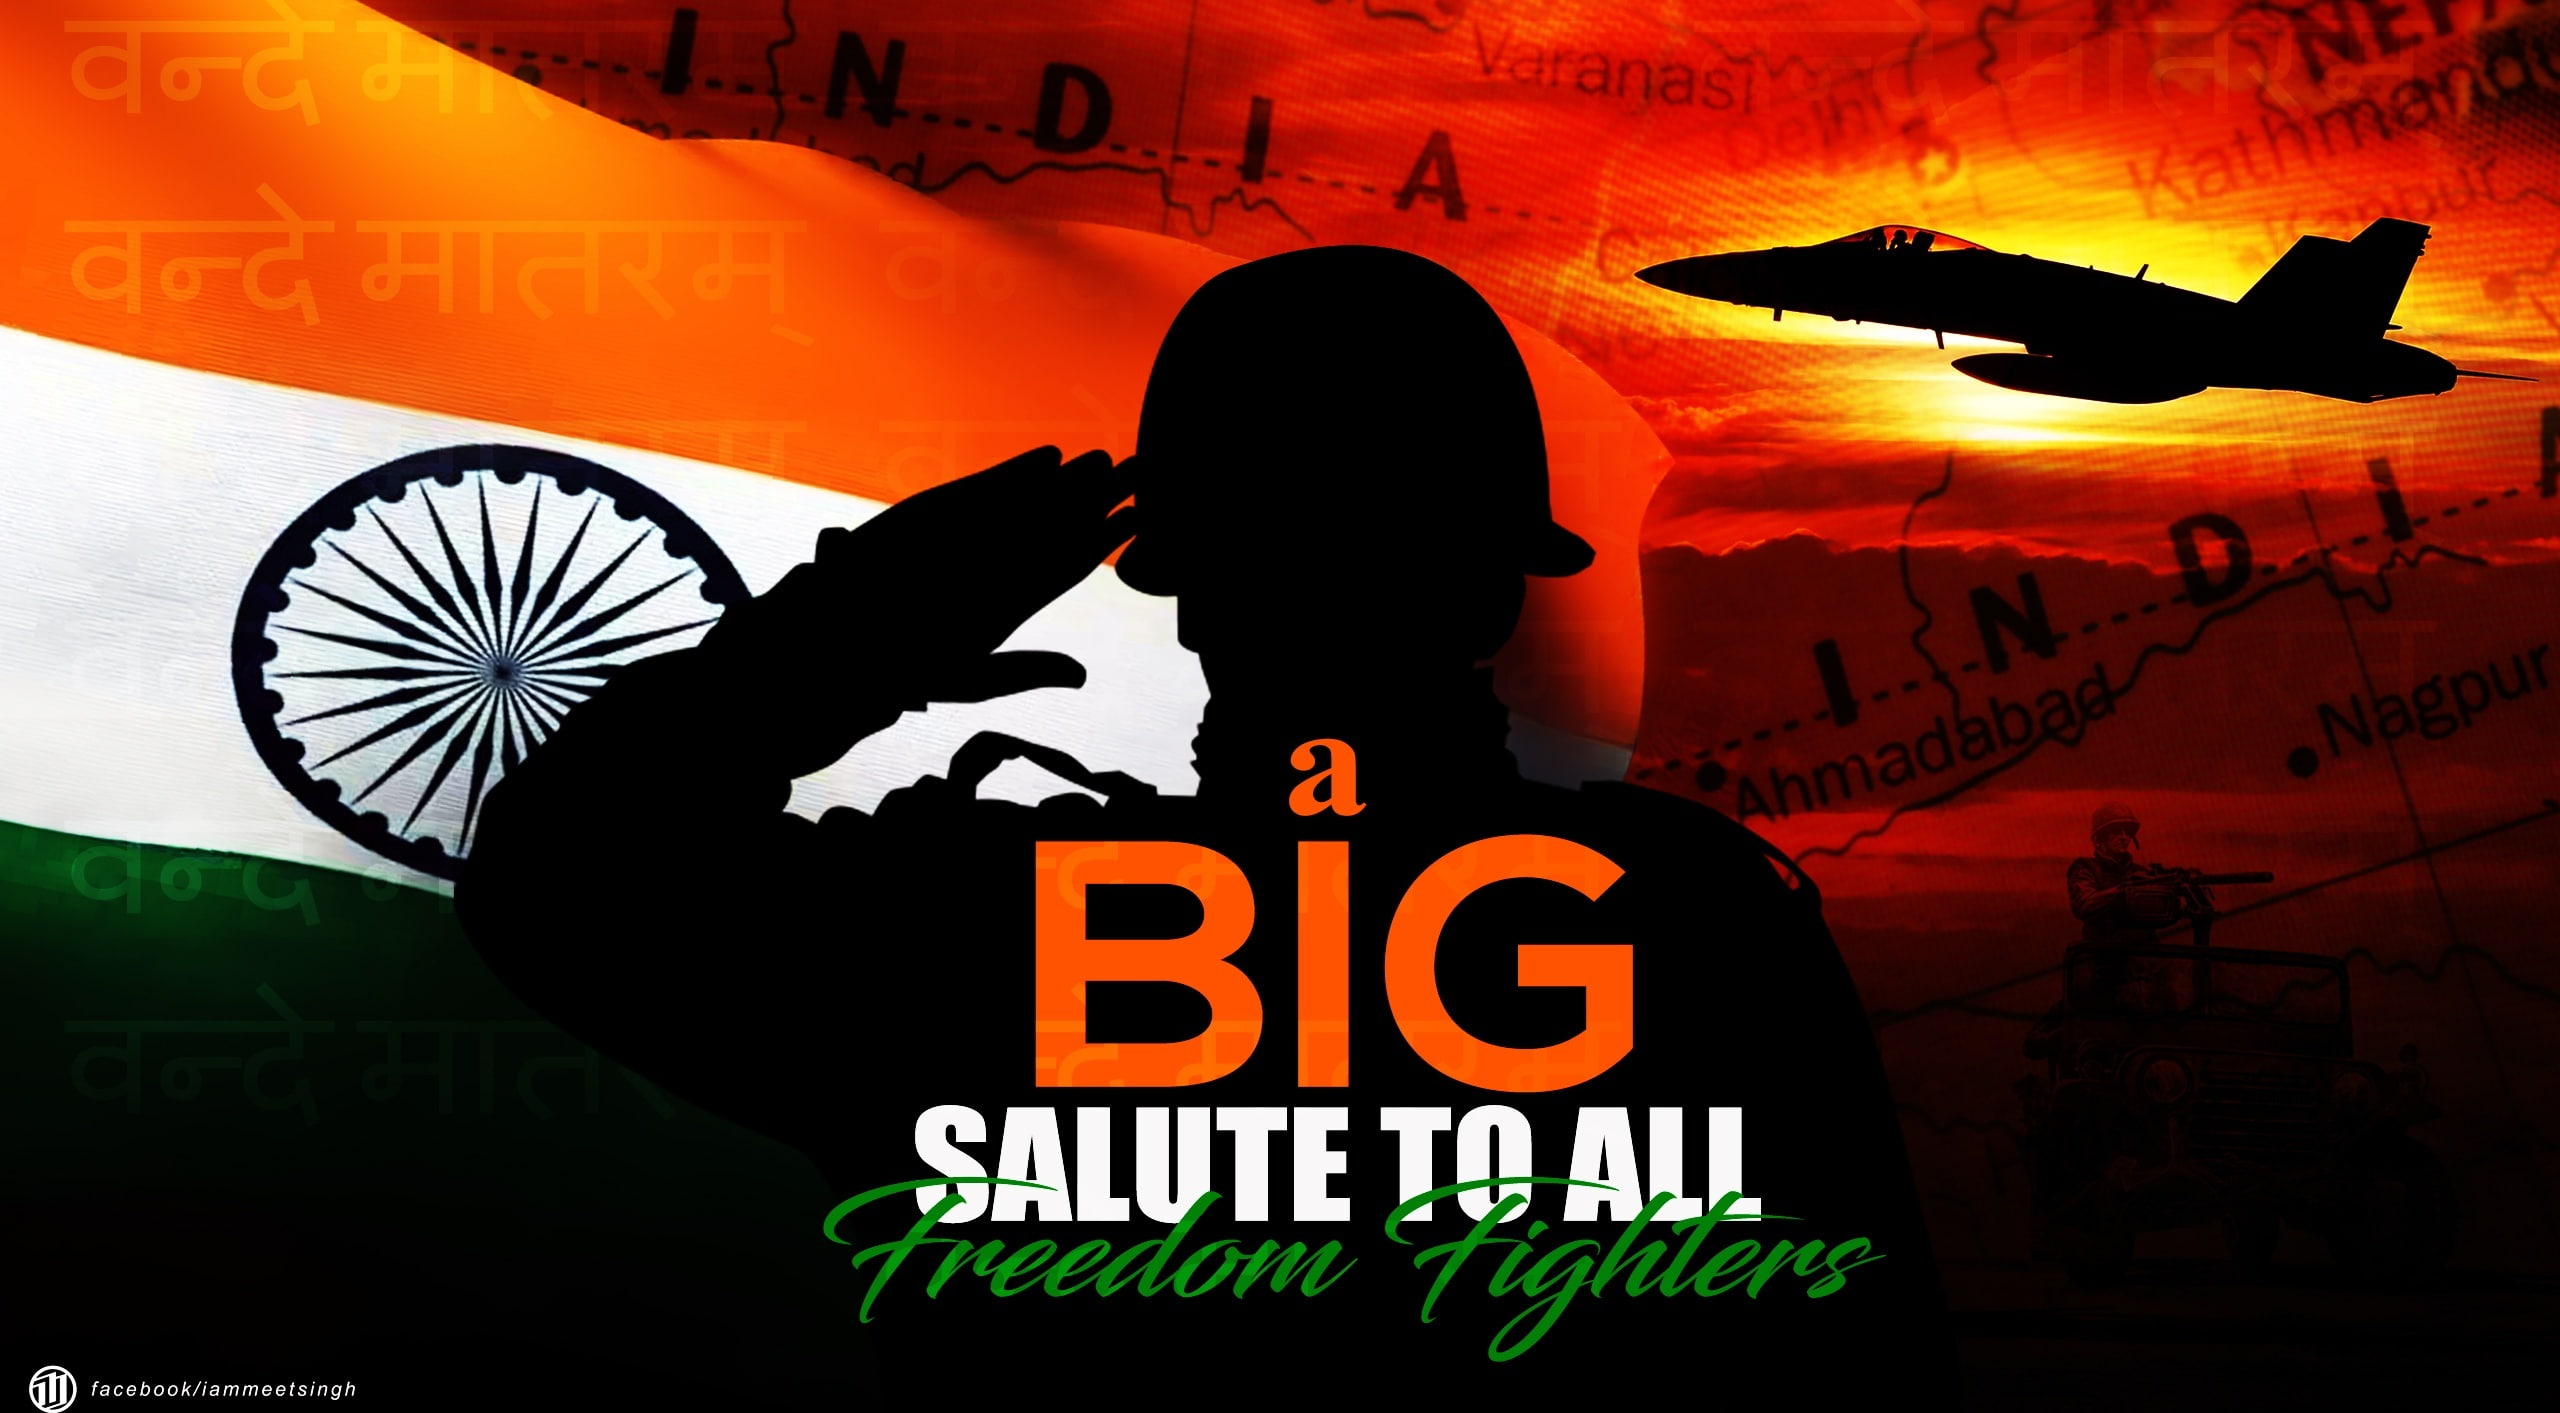 15 August, Army, indianarmy, 15august, indian independence day